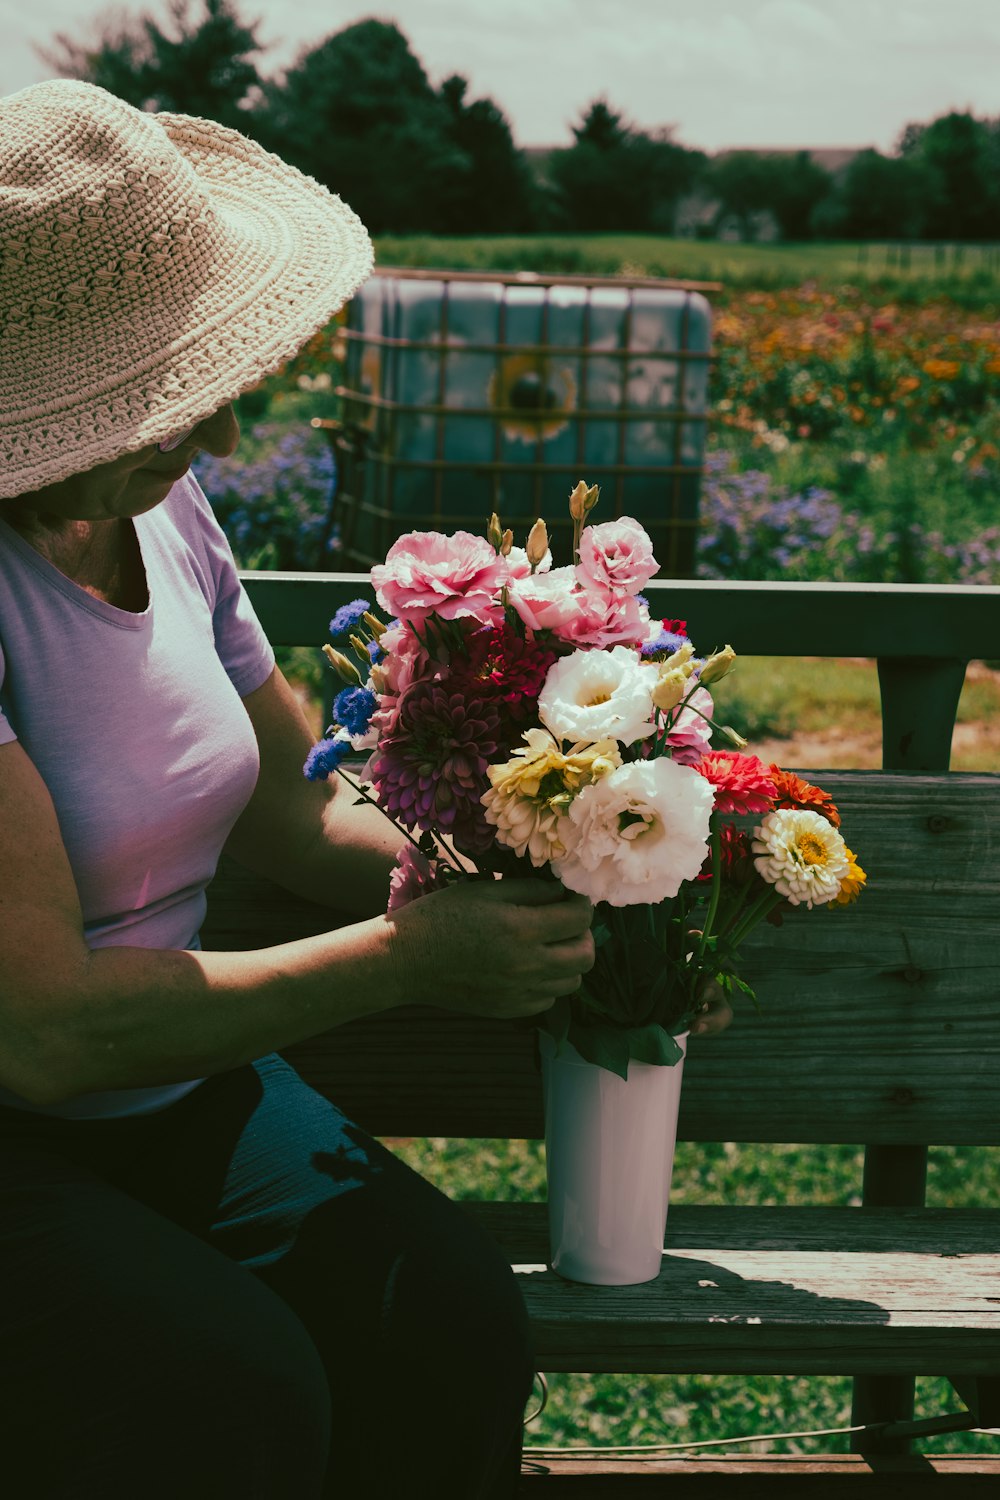 a woman sitting on a bench holding a bouquet of flowers